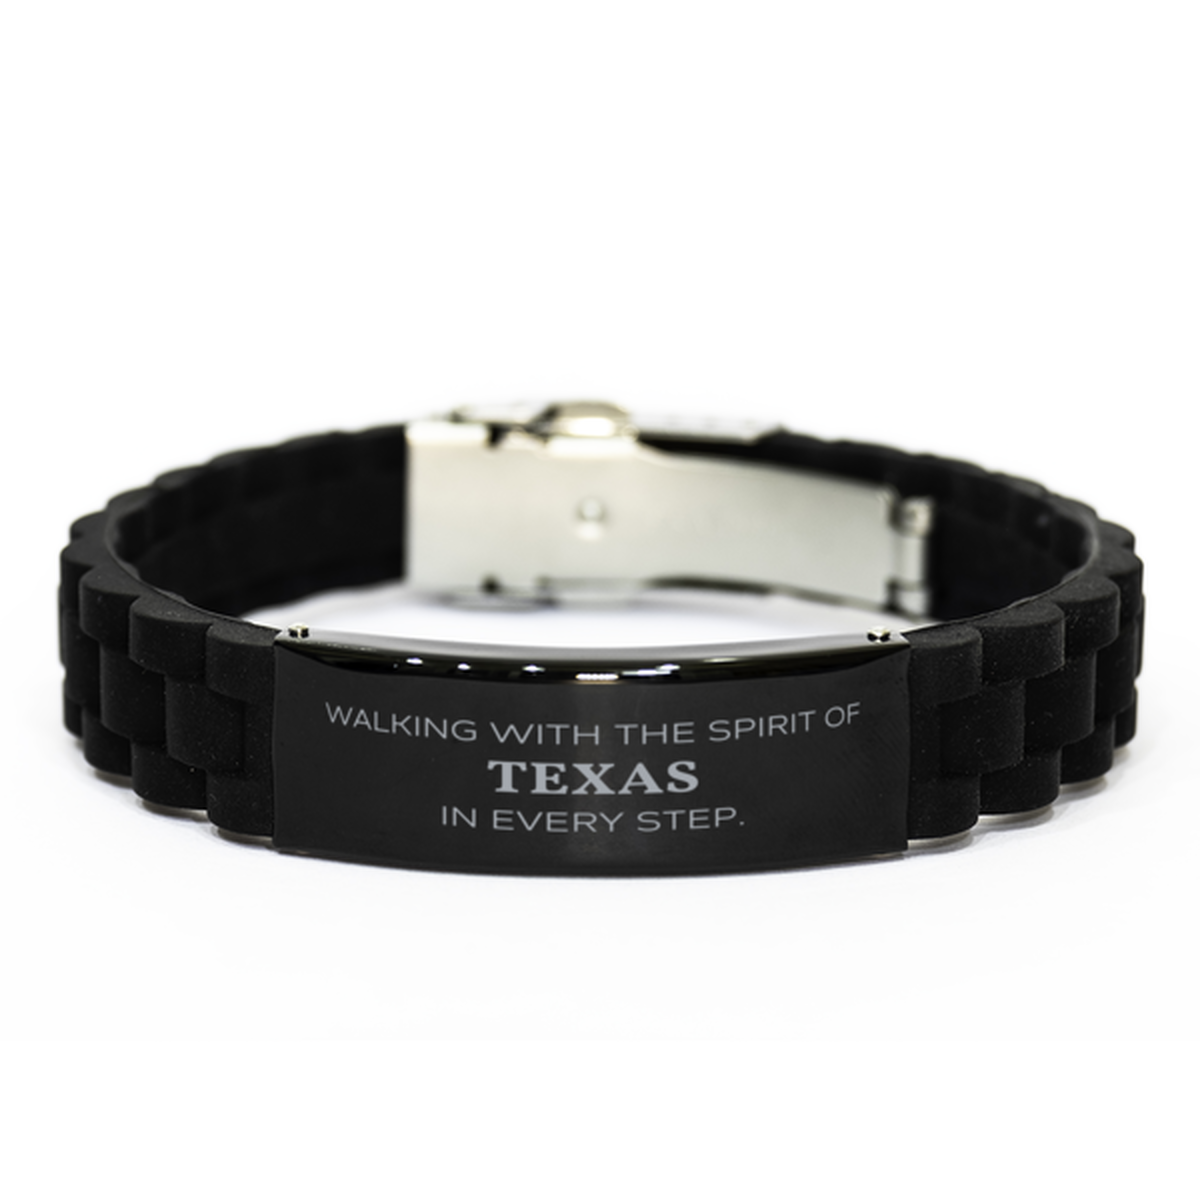 Texas Gifts, Walking with the spirit, Love Texas Birthday Christmas Black Glidelock Clasp Bracelet For Texas People, Men, Women, Friends